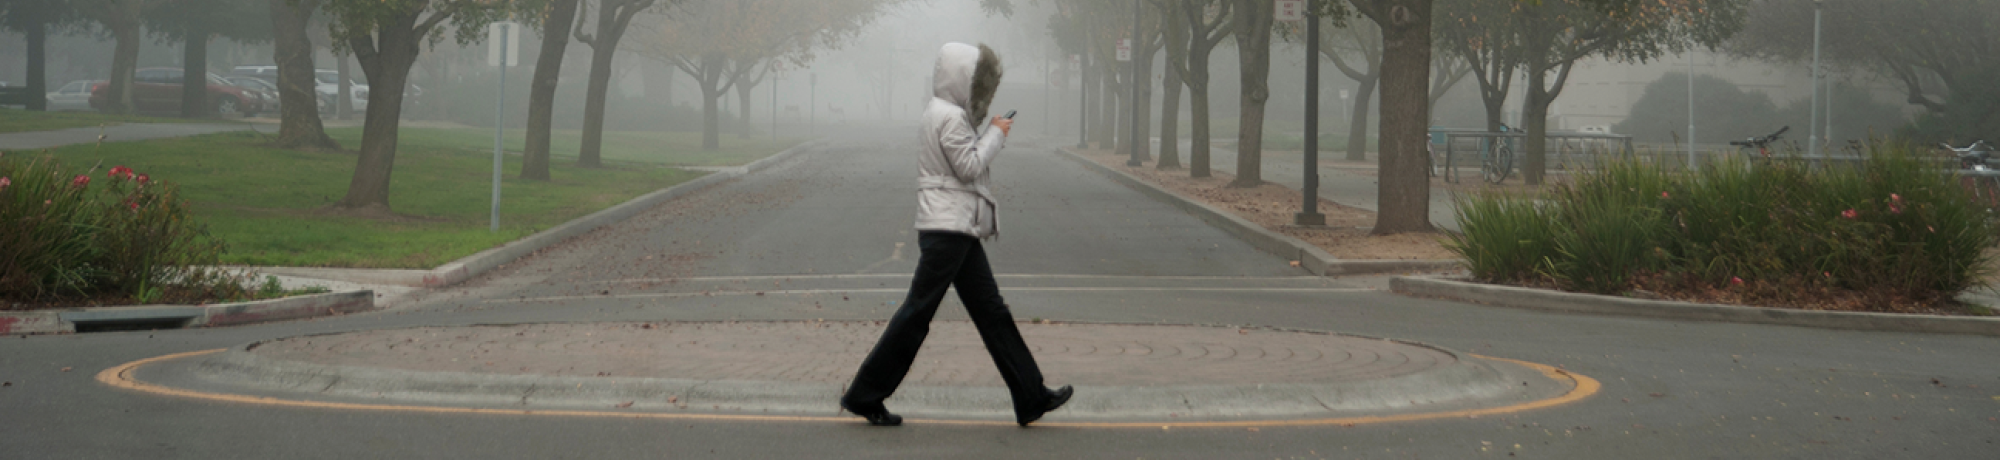 Student walking while looking at smartphone on foggy day in bike roundabout